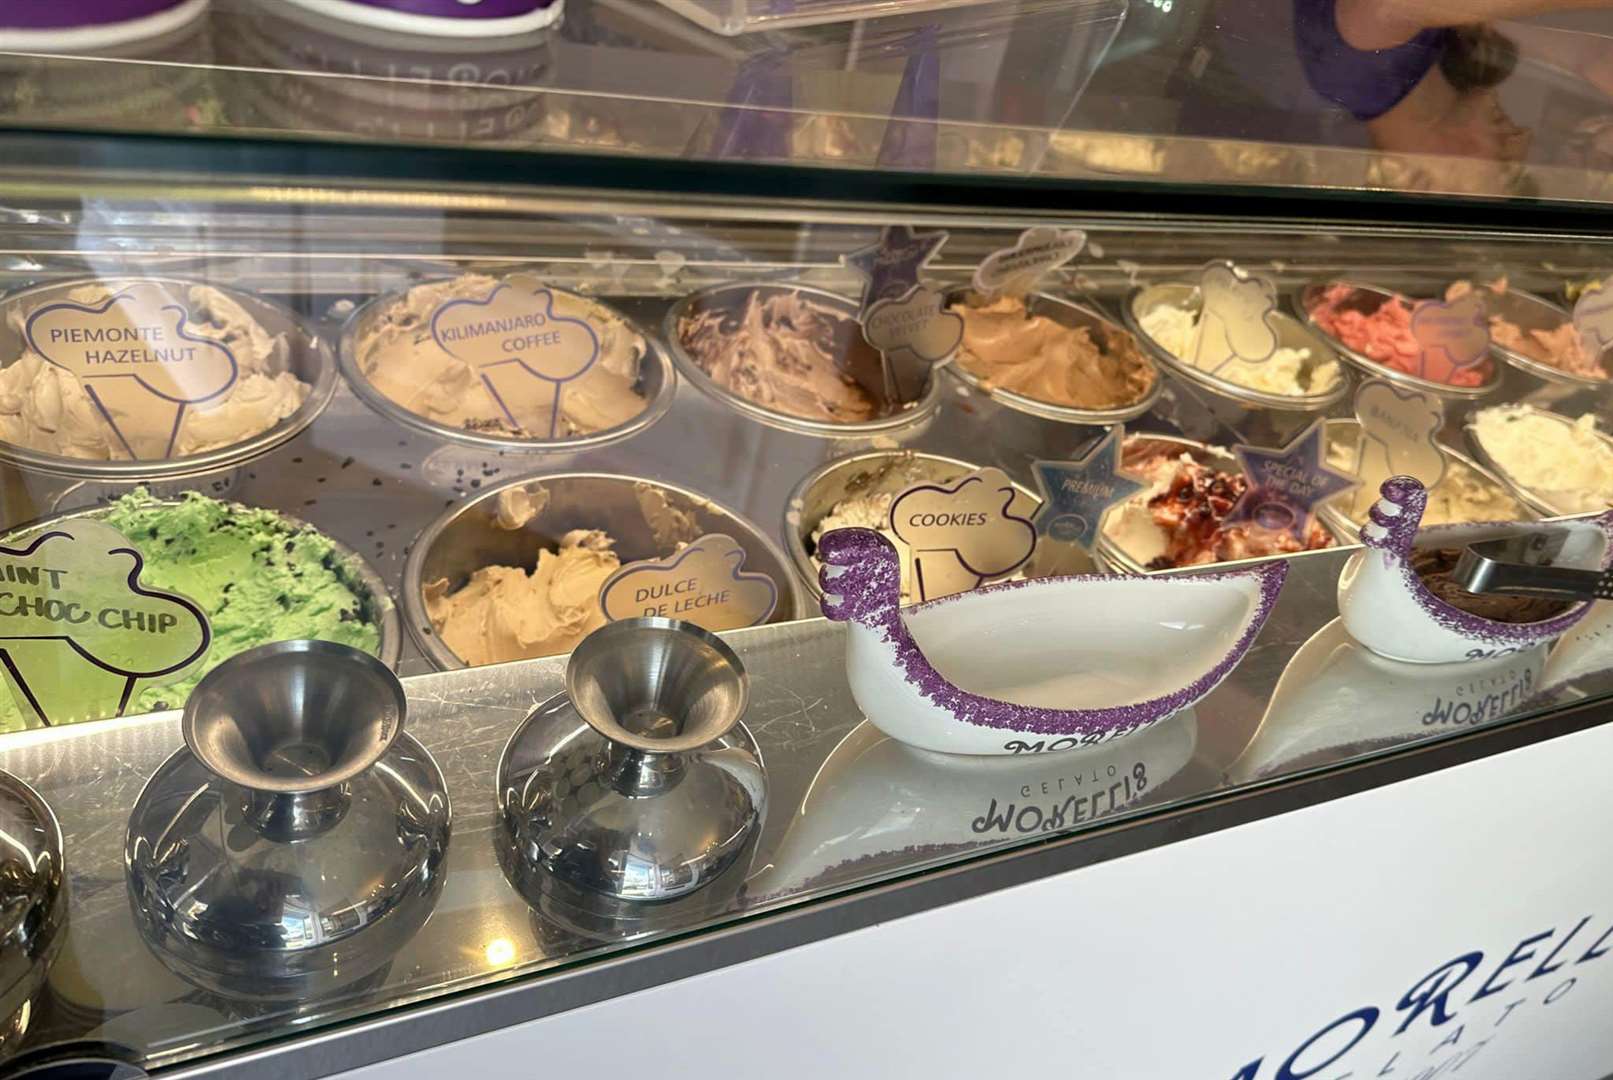 The treats on offer at the latest Morelli's parlour in Whitstable. Pic: Morelli's